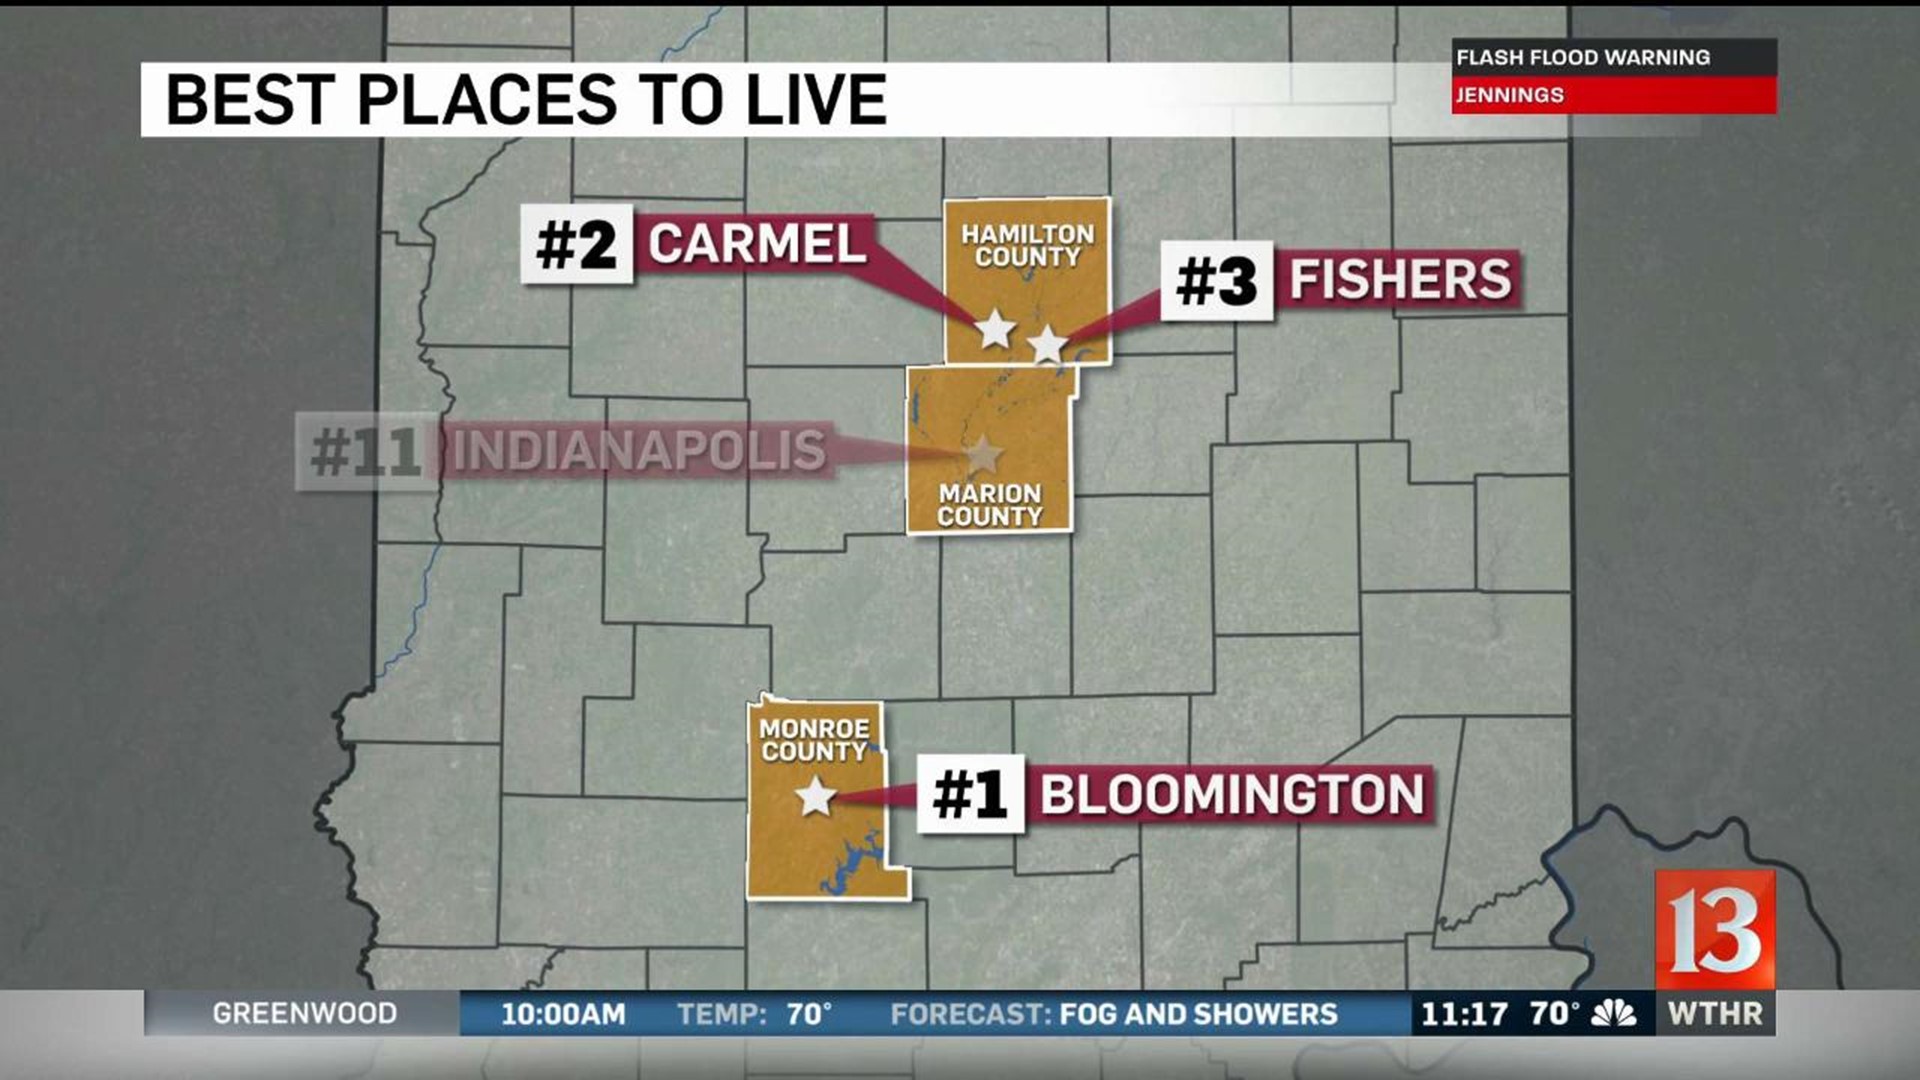 Best places to live in Indiana